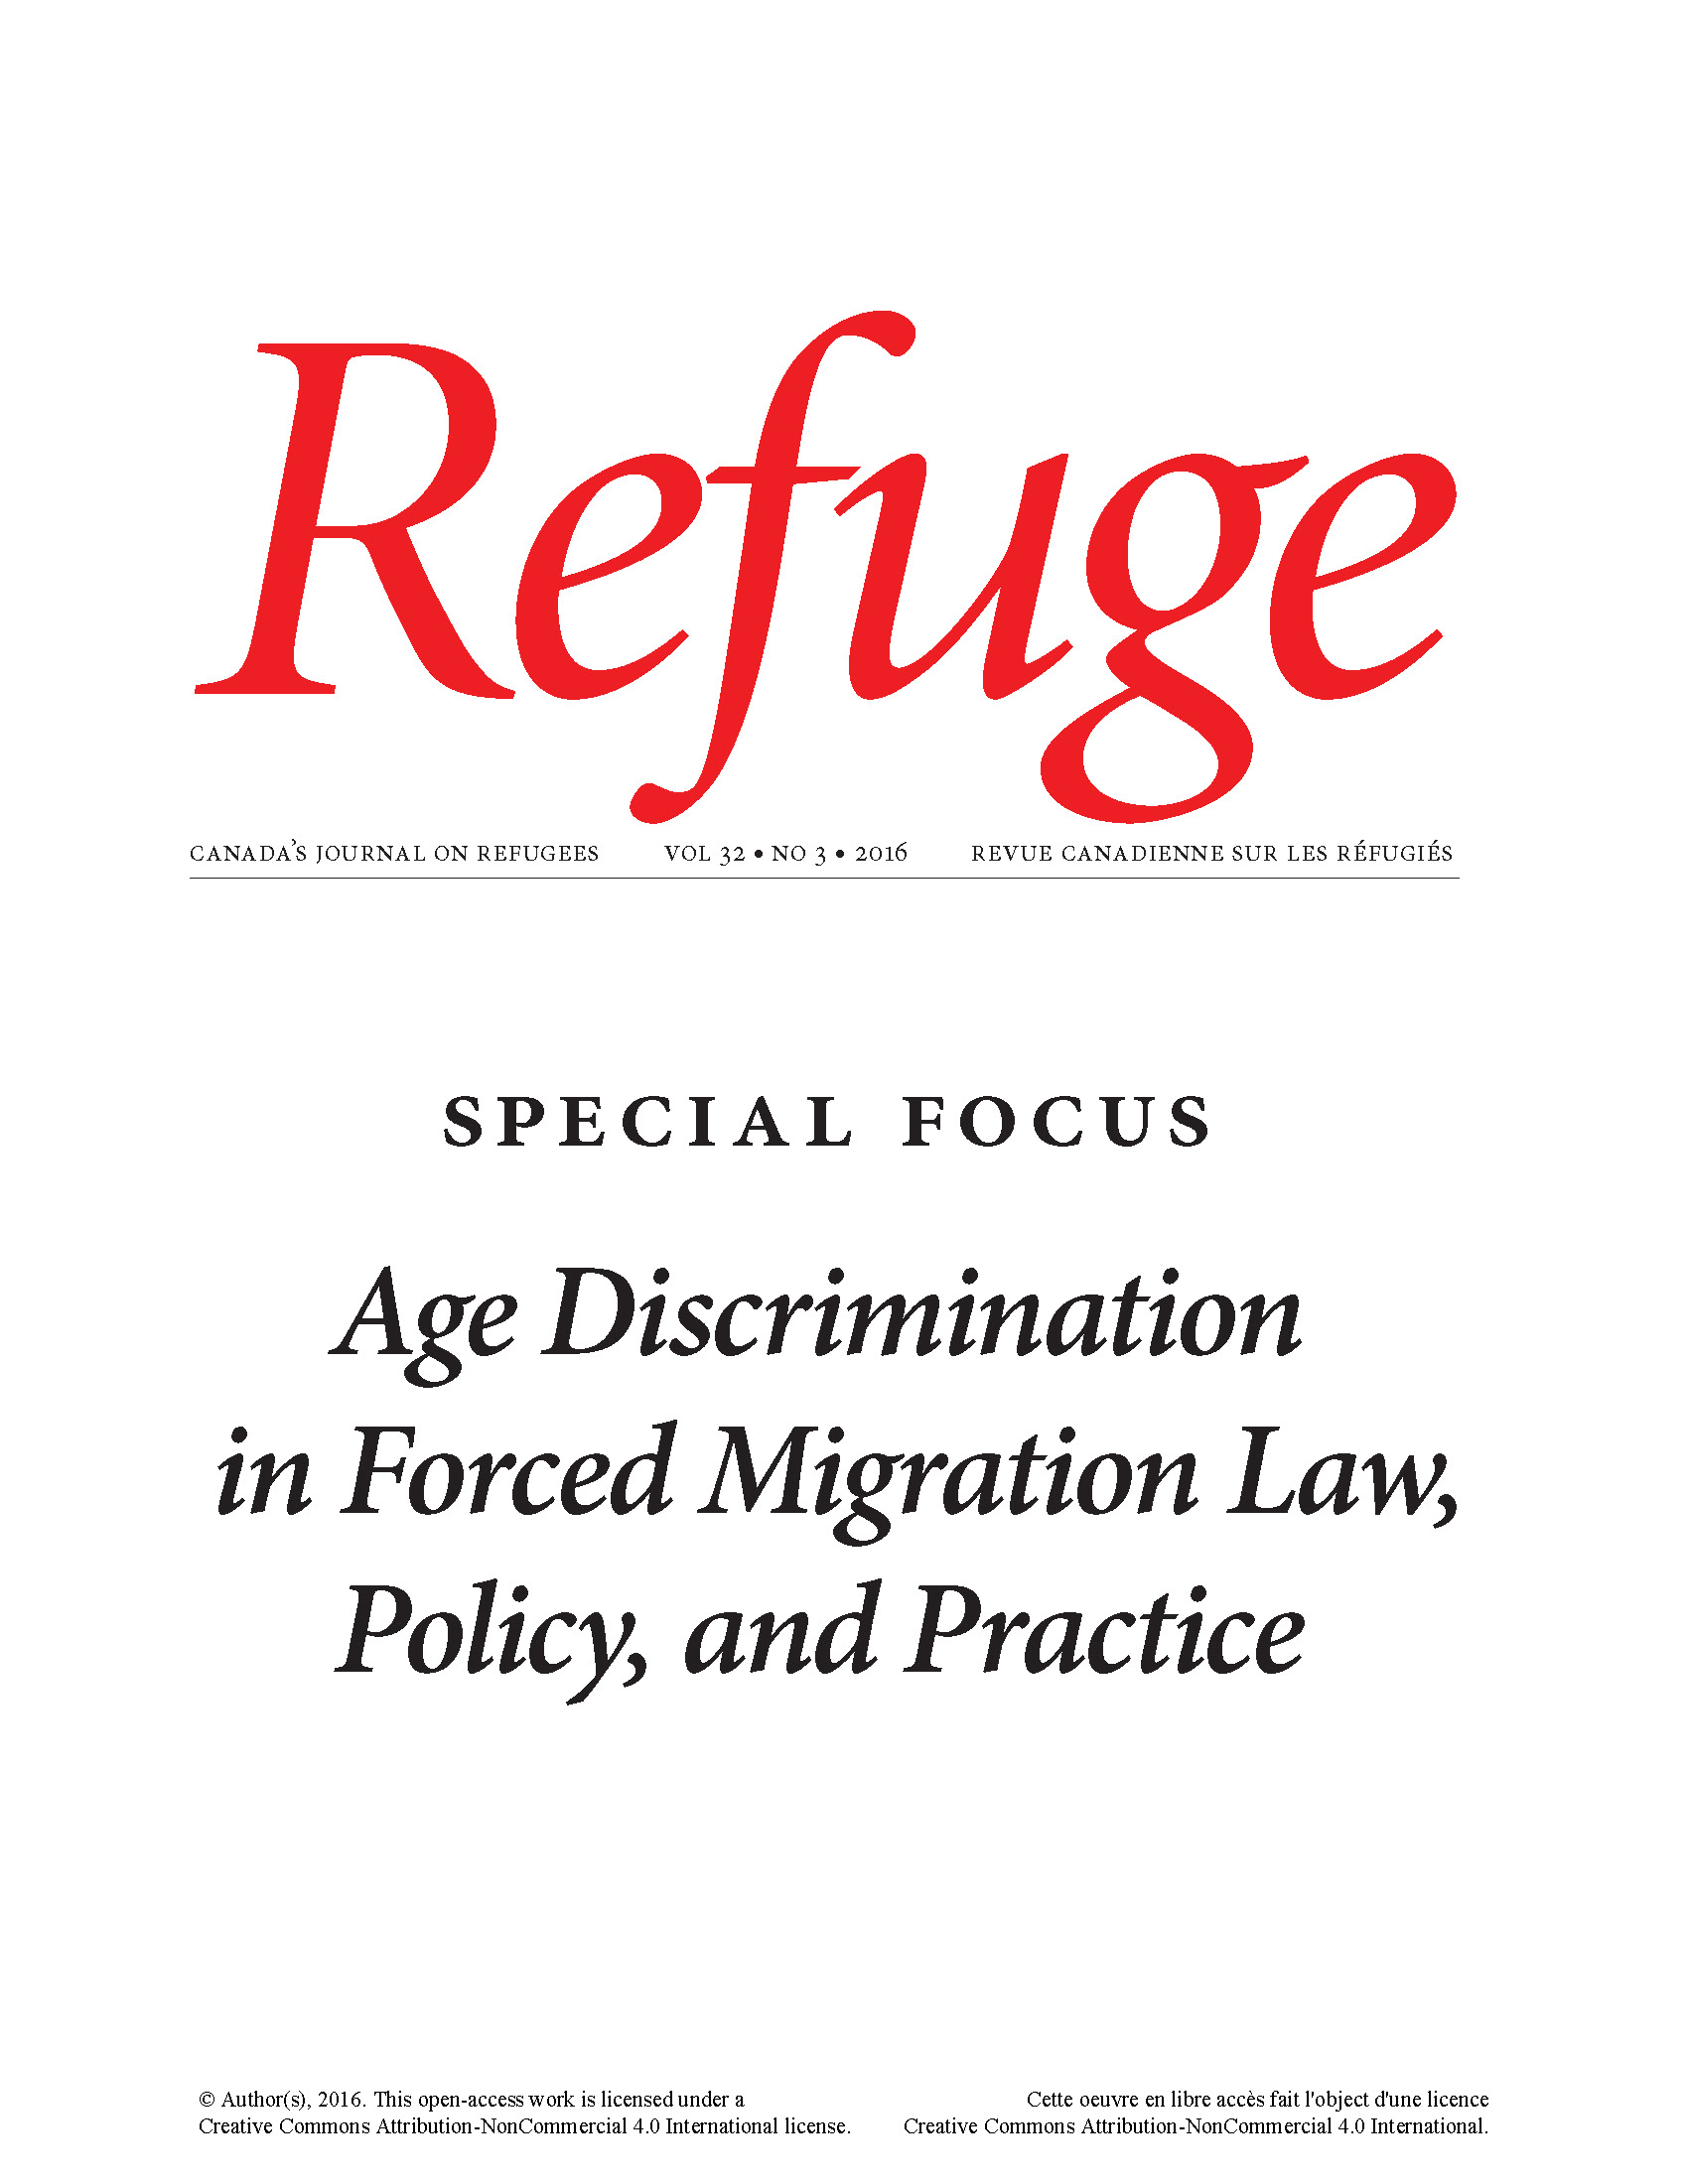 cover image of Refuge issue with special focus on age discrimination